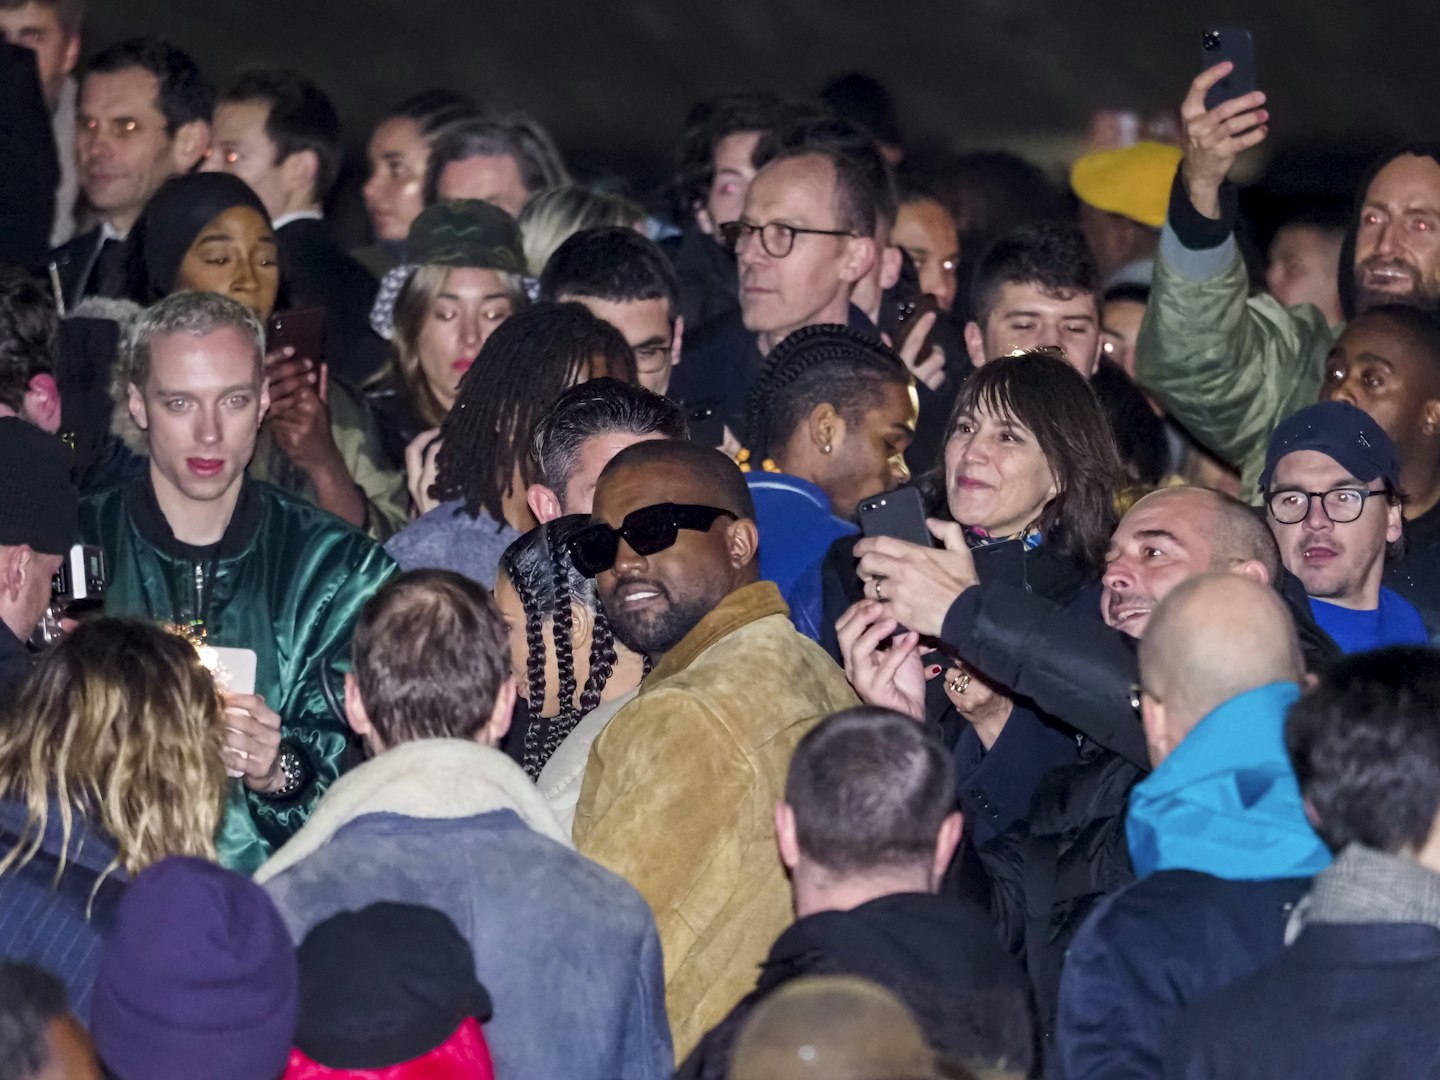 Kanye swarmed by the crowd after his Yeezy fashion show